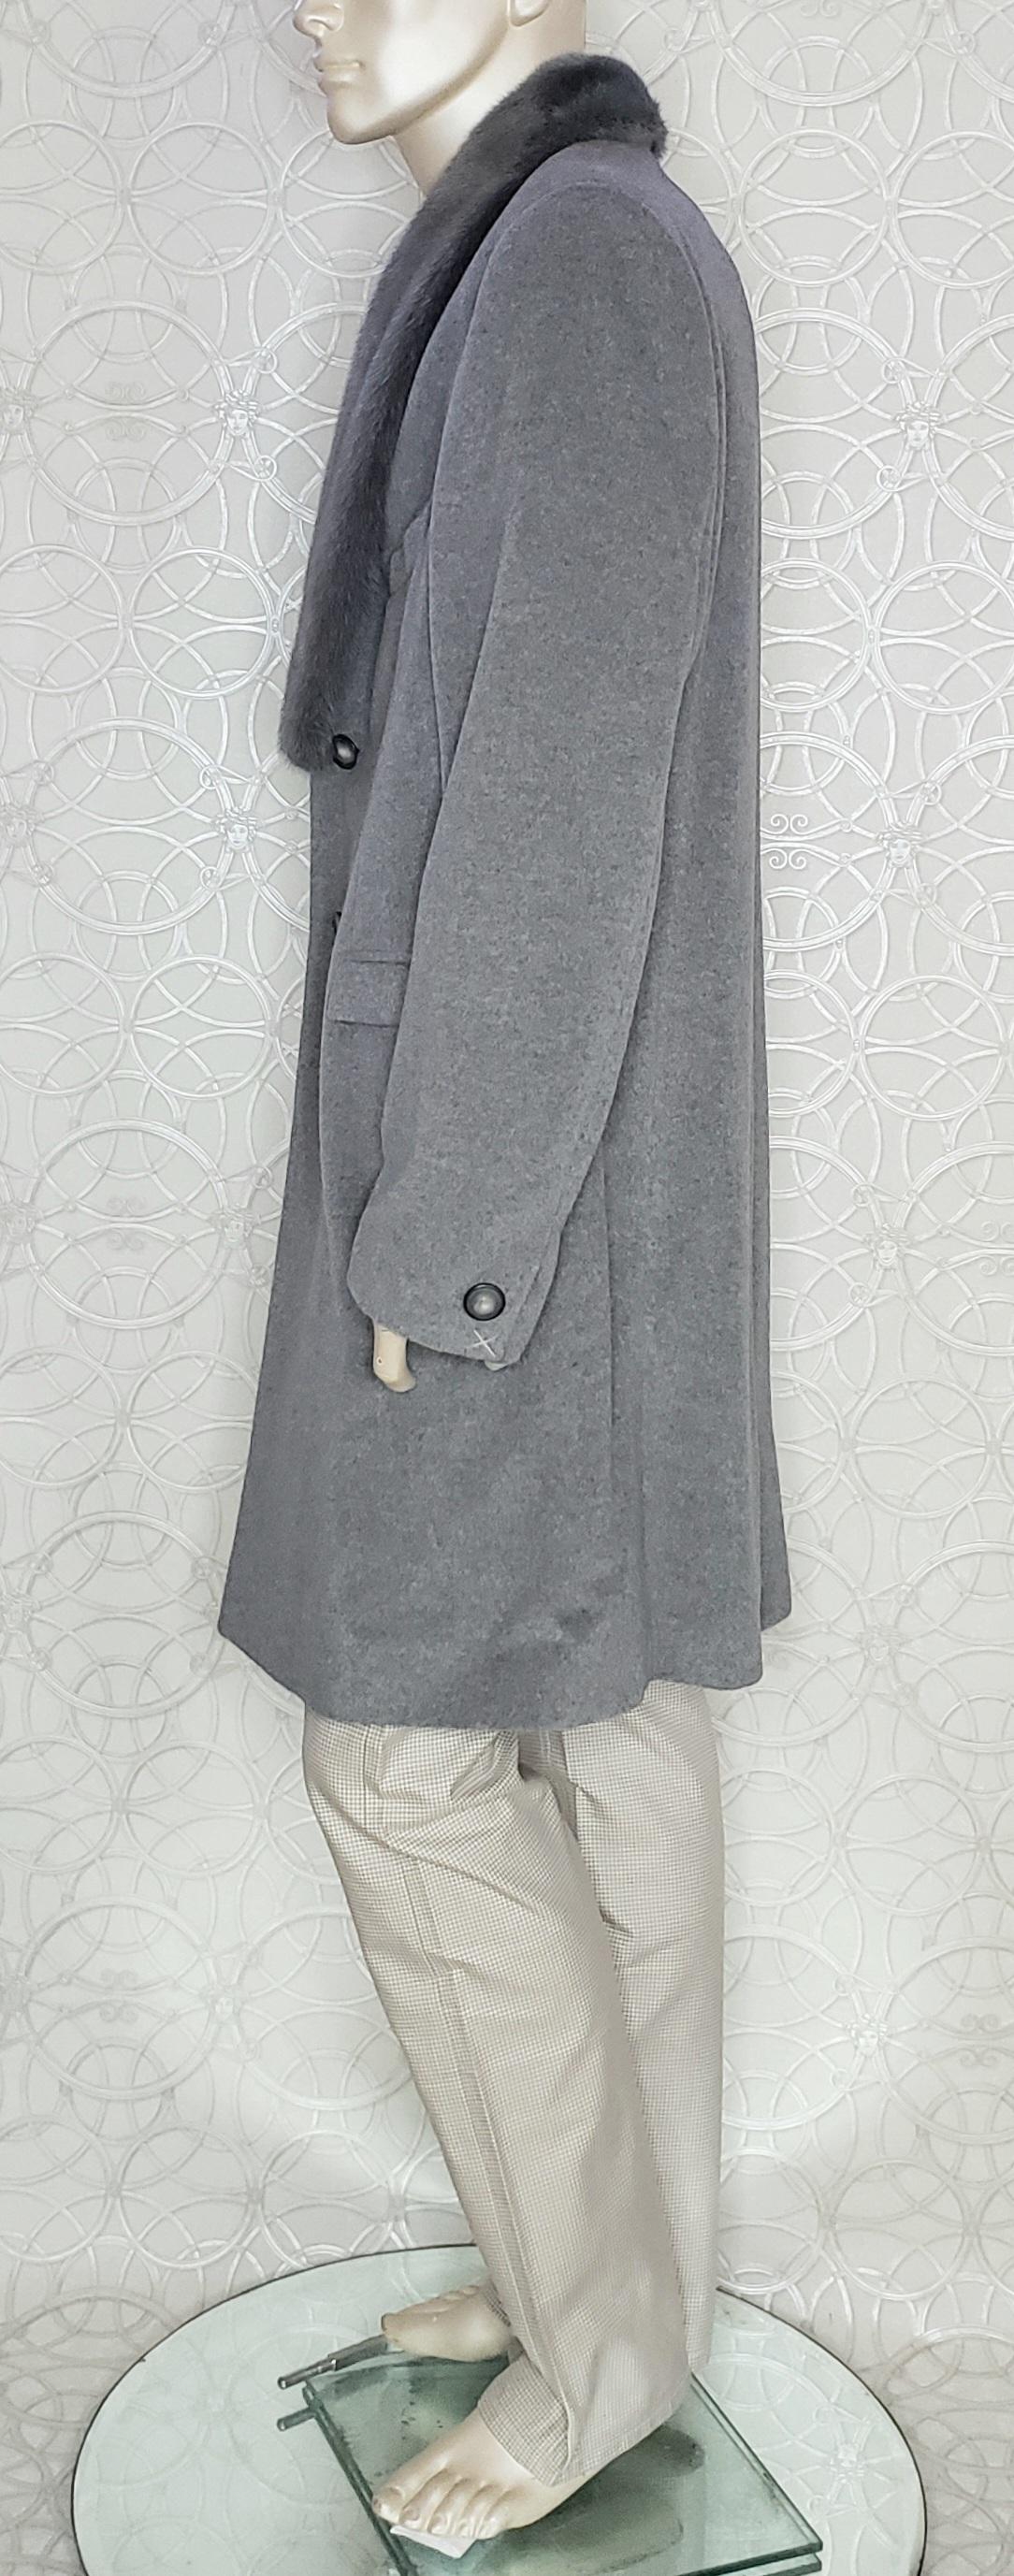 NEW VERSACE GRAY ANGORA COAT With MINK FUR COLLAR 54 - 2XL For Sale 3